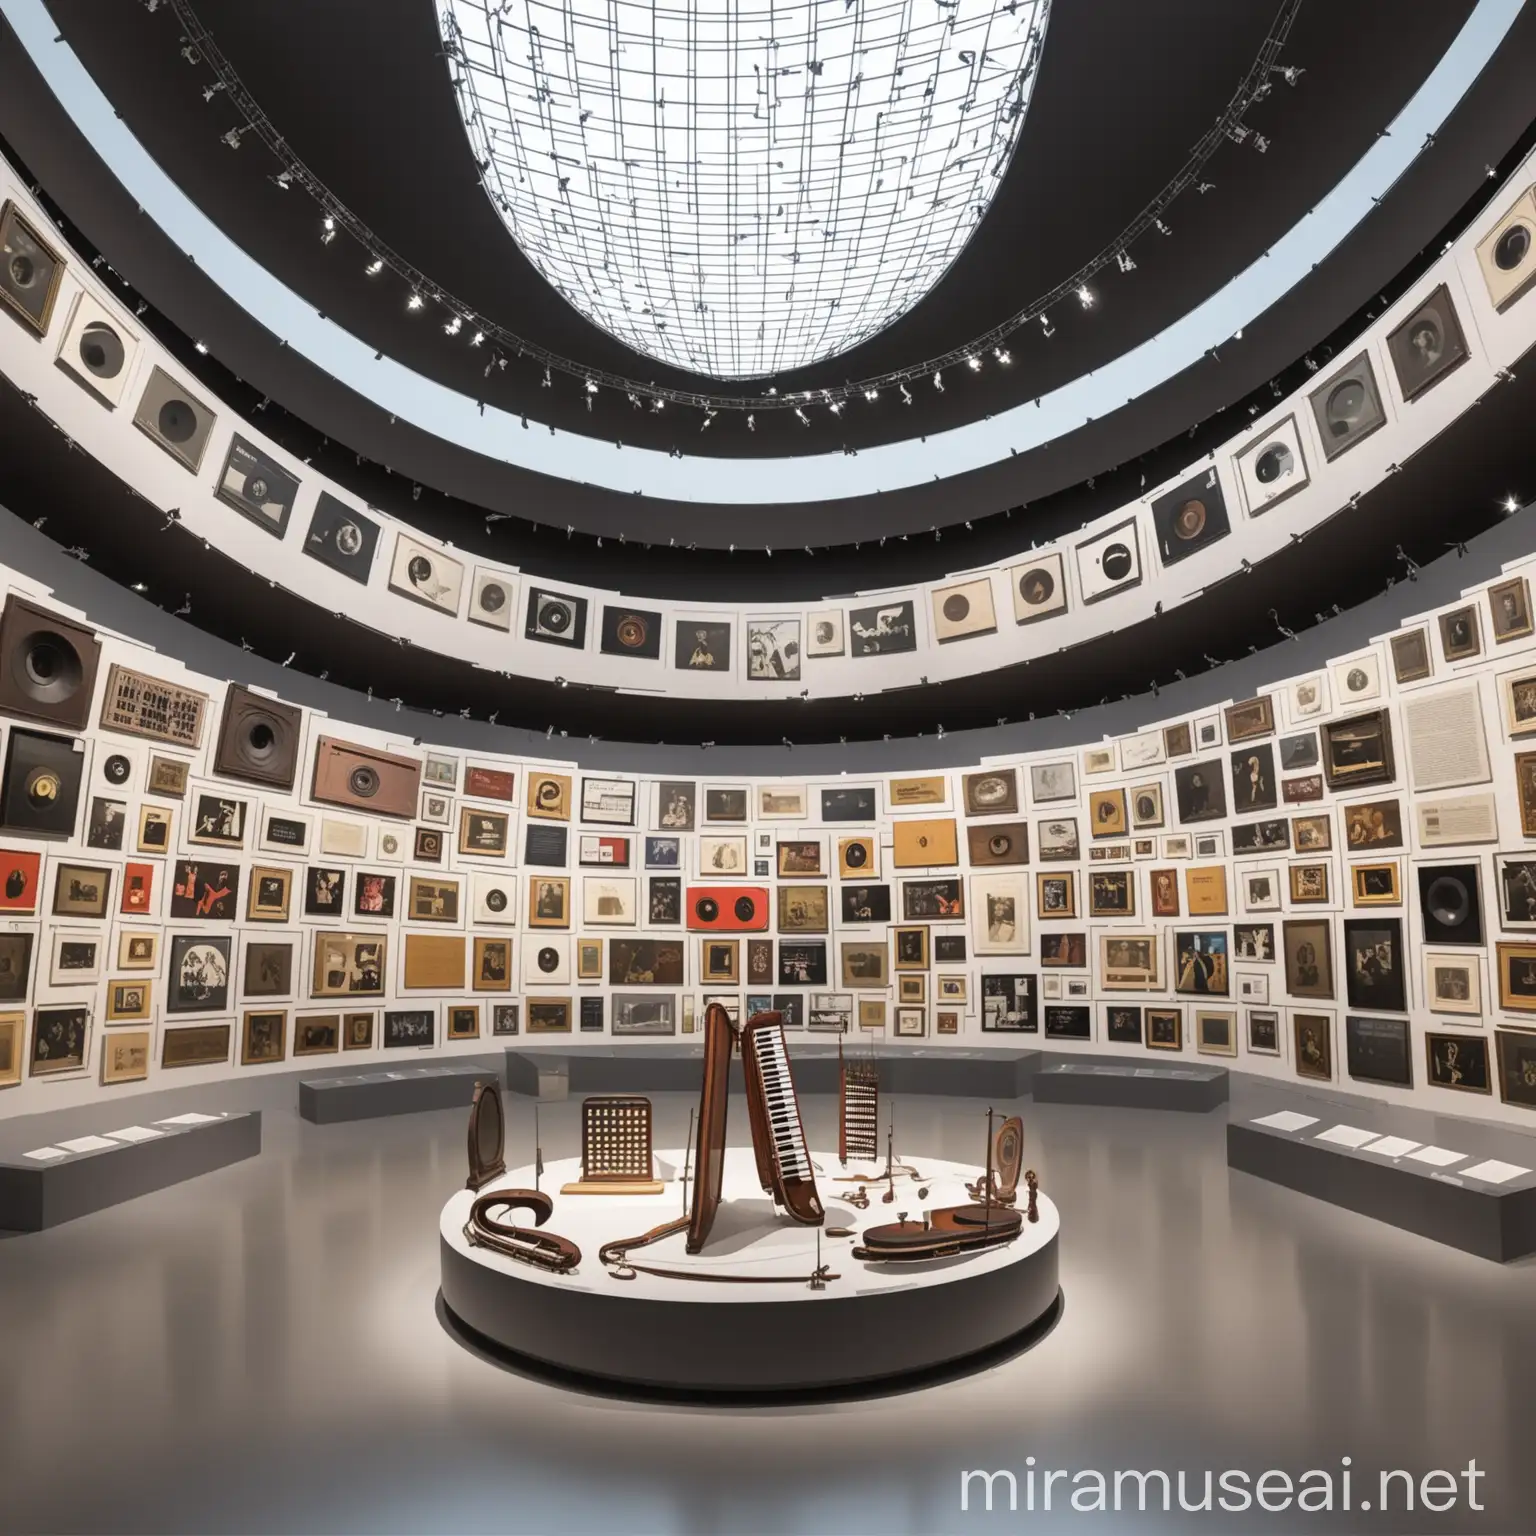 Innovative Music Museum with Interactive Exhibits and Immersive Experiences